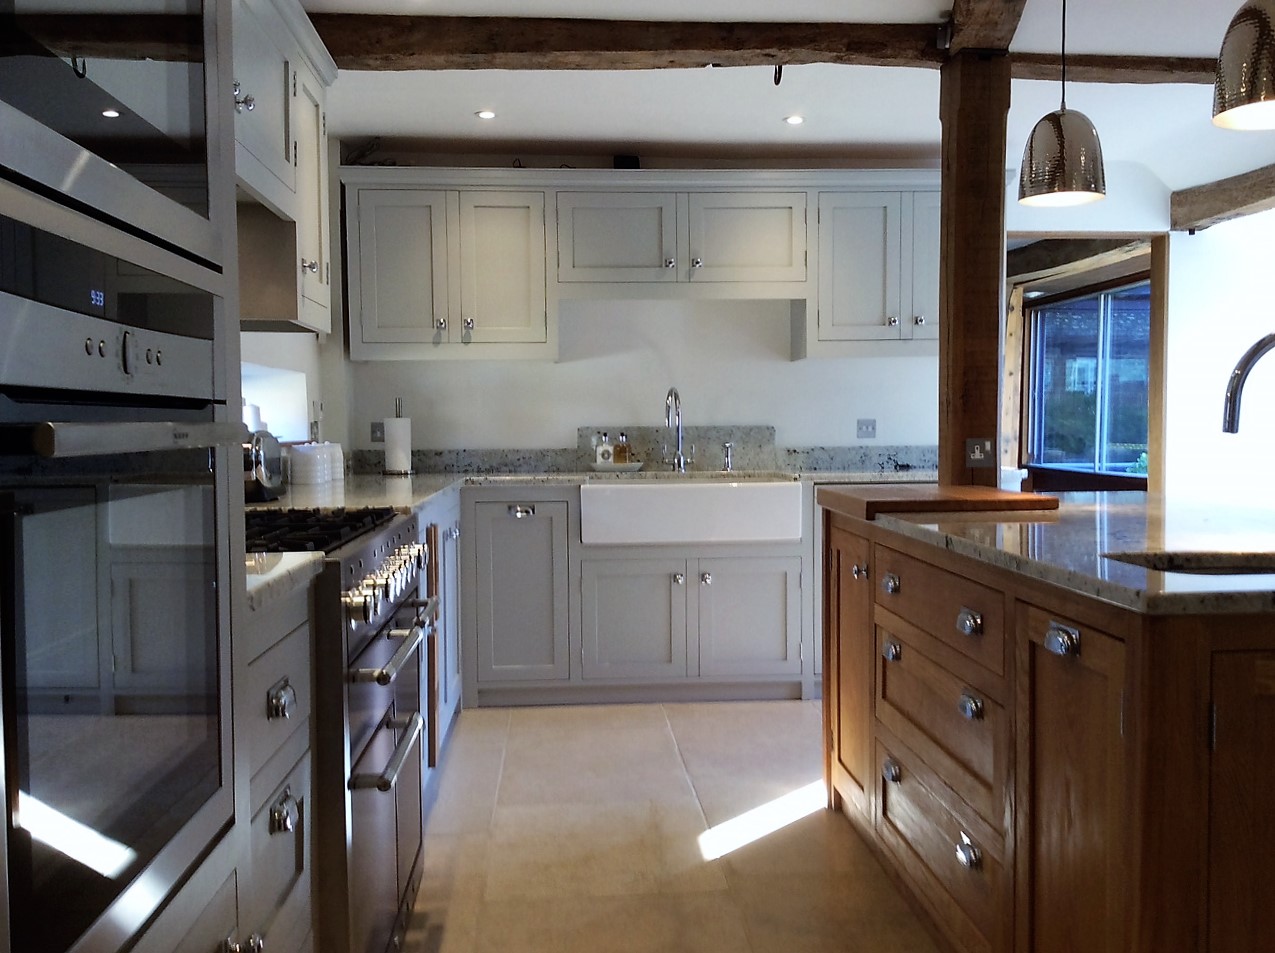 Tailor made  solid wood kitchen in the shaker style bespoke design for Barn in Oxfordshire.Feature solid oak island site ,belfast sink unit.